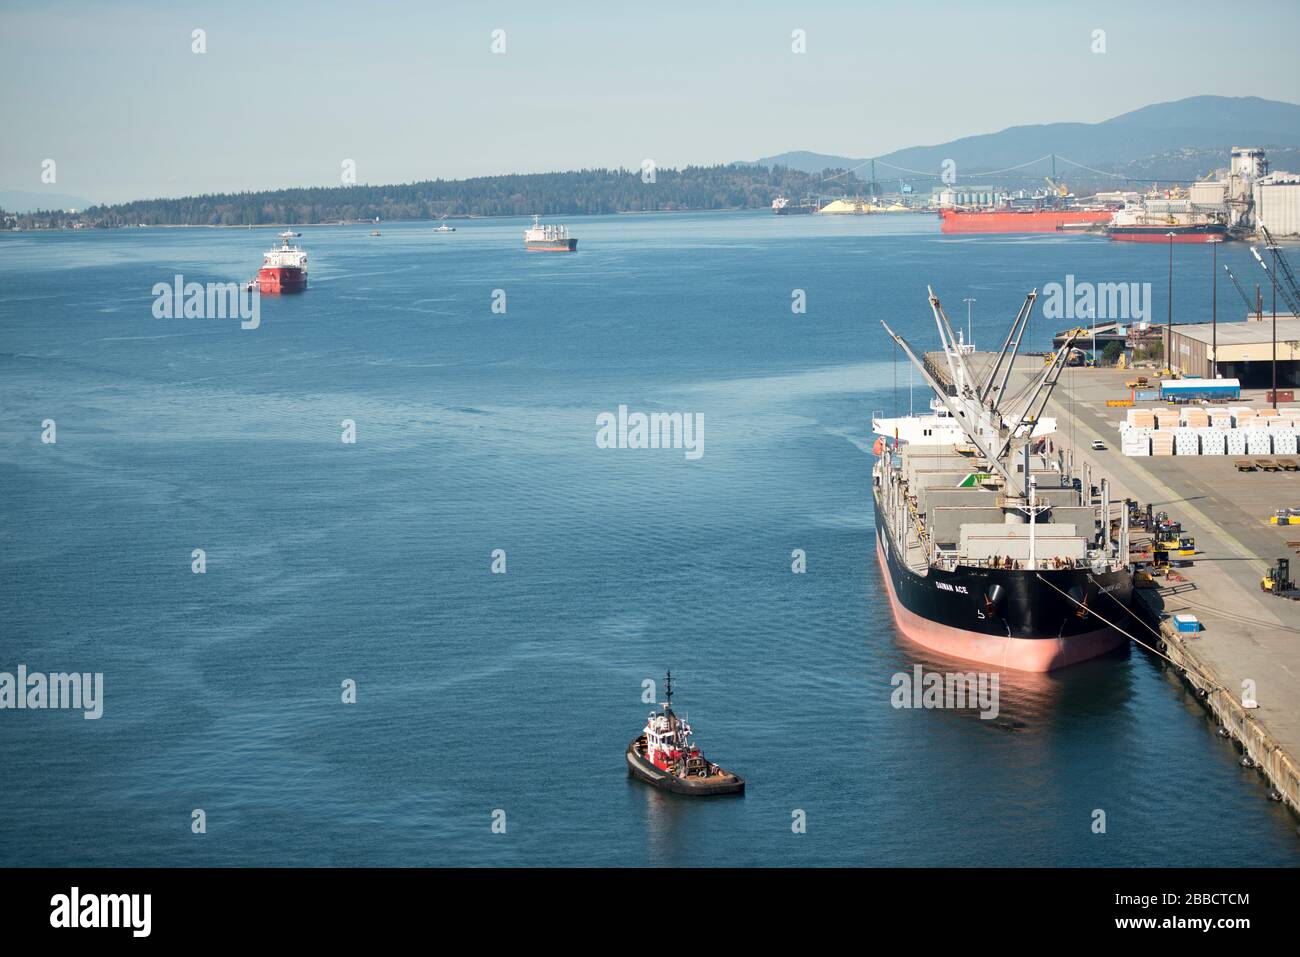 Bulk cargo freighter and tugboats in North Vancouver, British Columbia, Canada Stock Photo